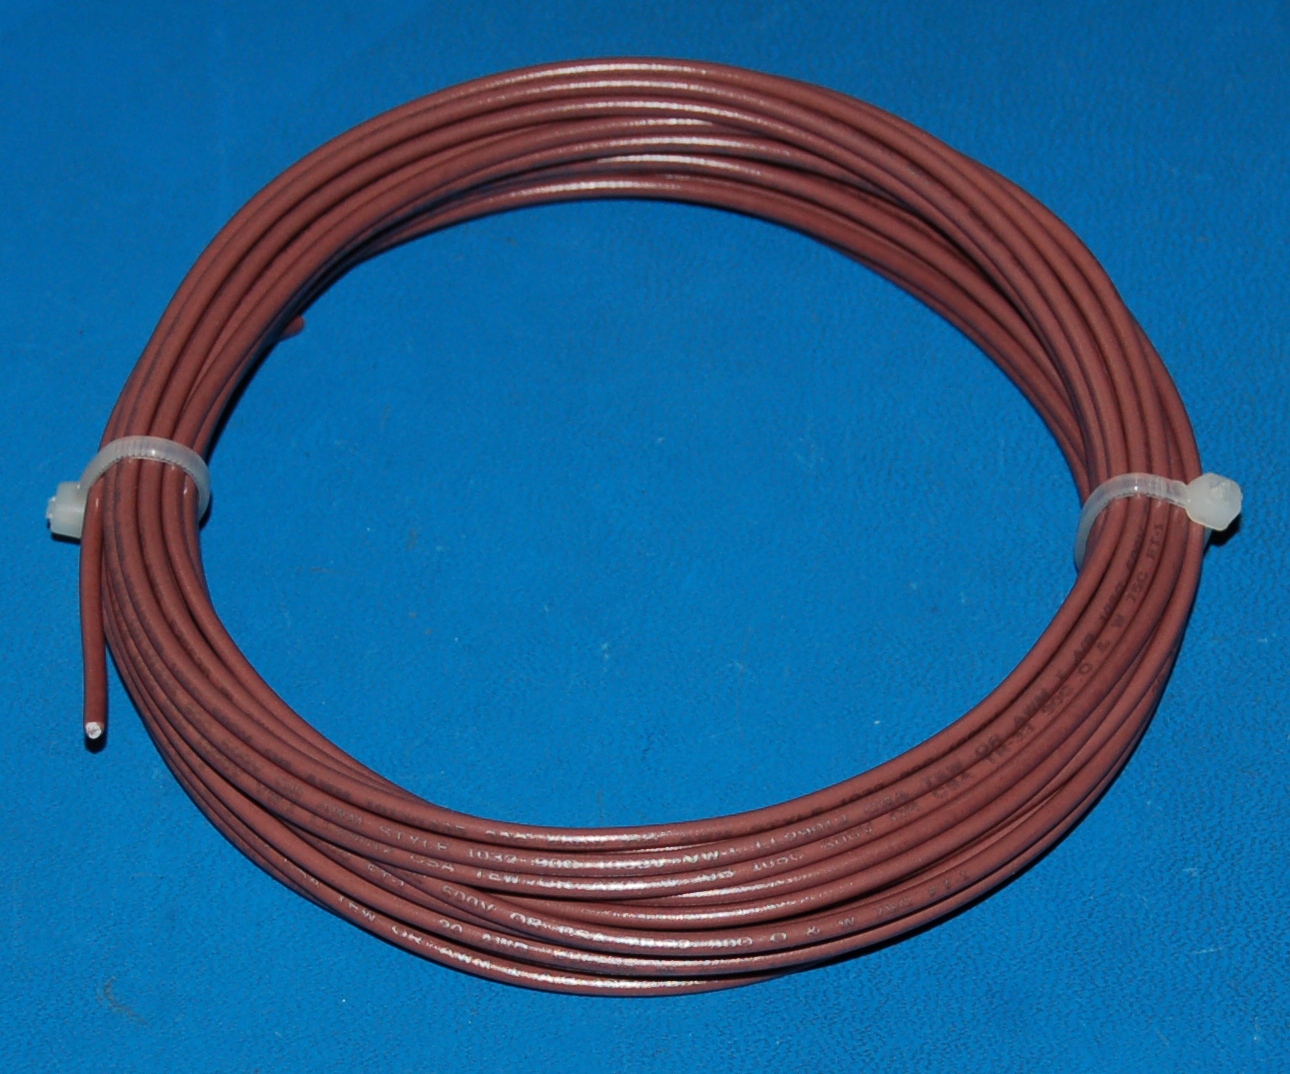 Solid Tinned Copper Wire, 600V, #20 AWG x 25' (Brown)